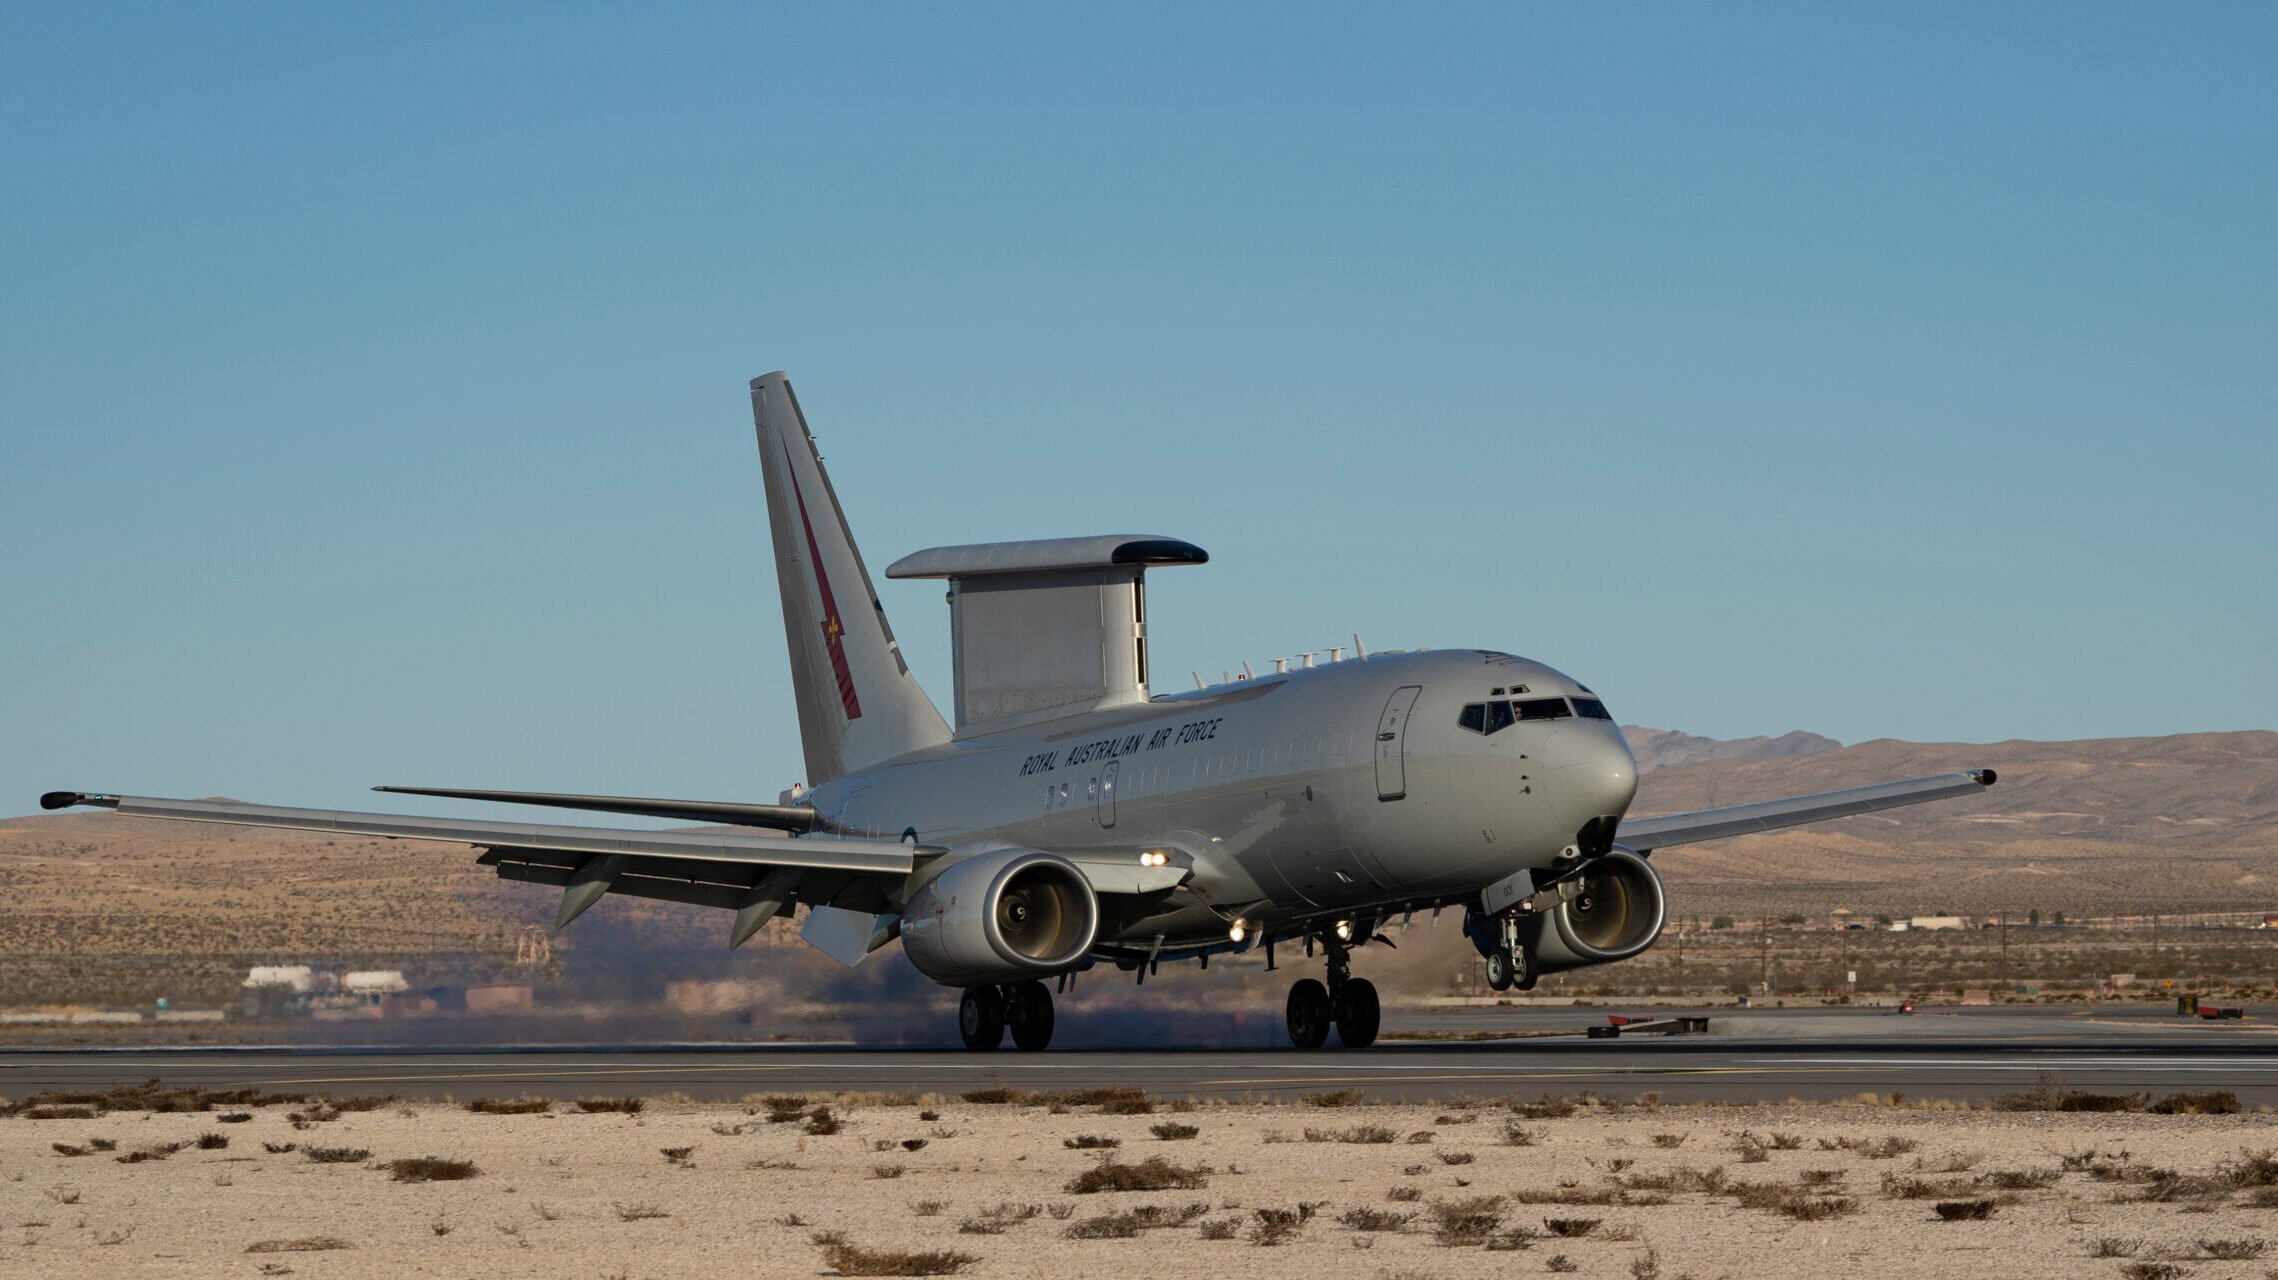 Congress is right: Accelerate the E-7 Wedgetail buy